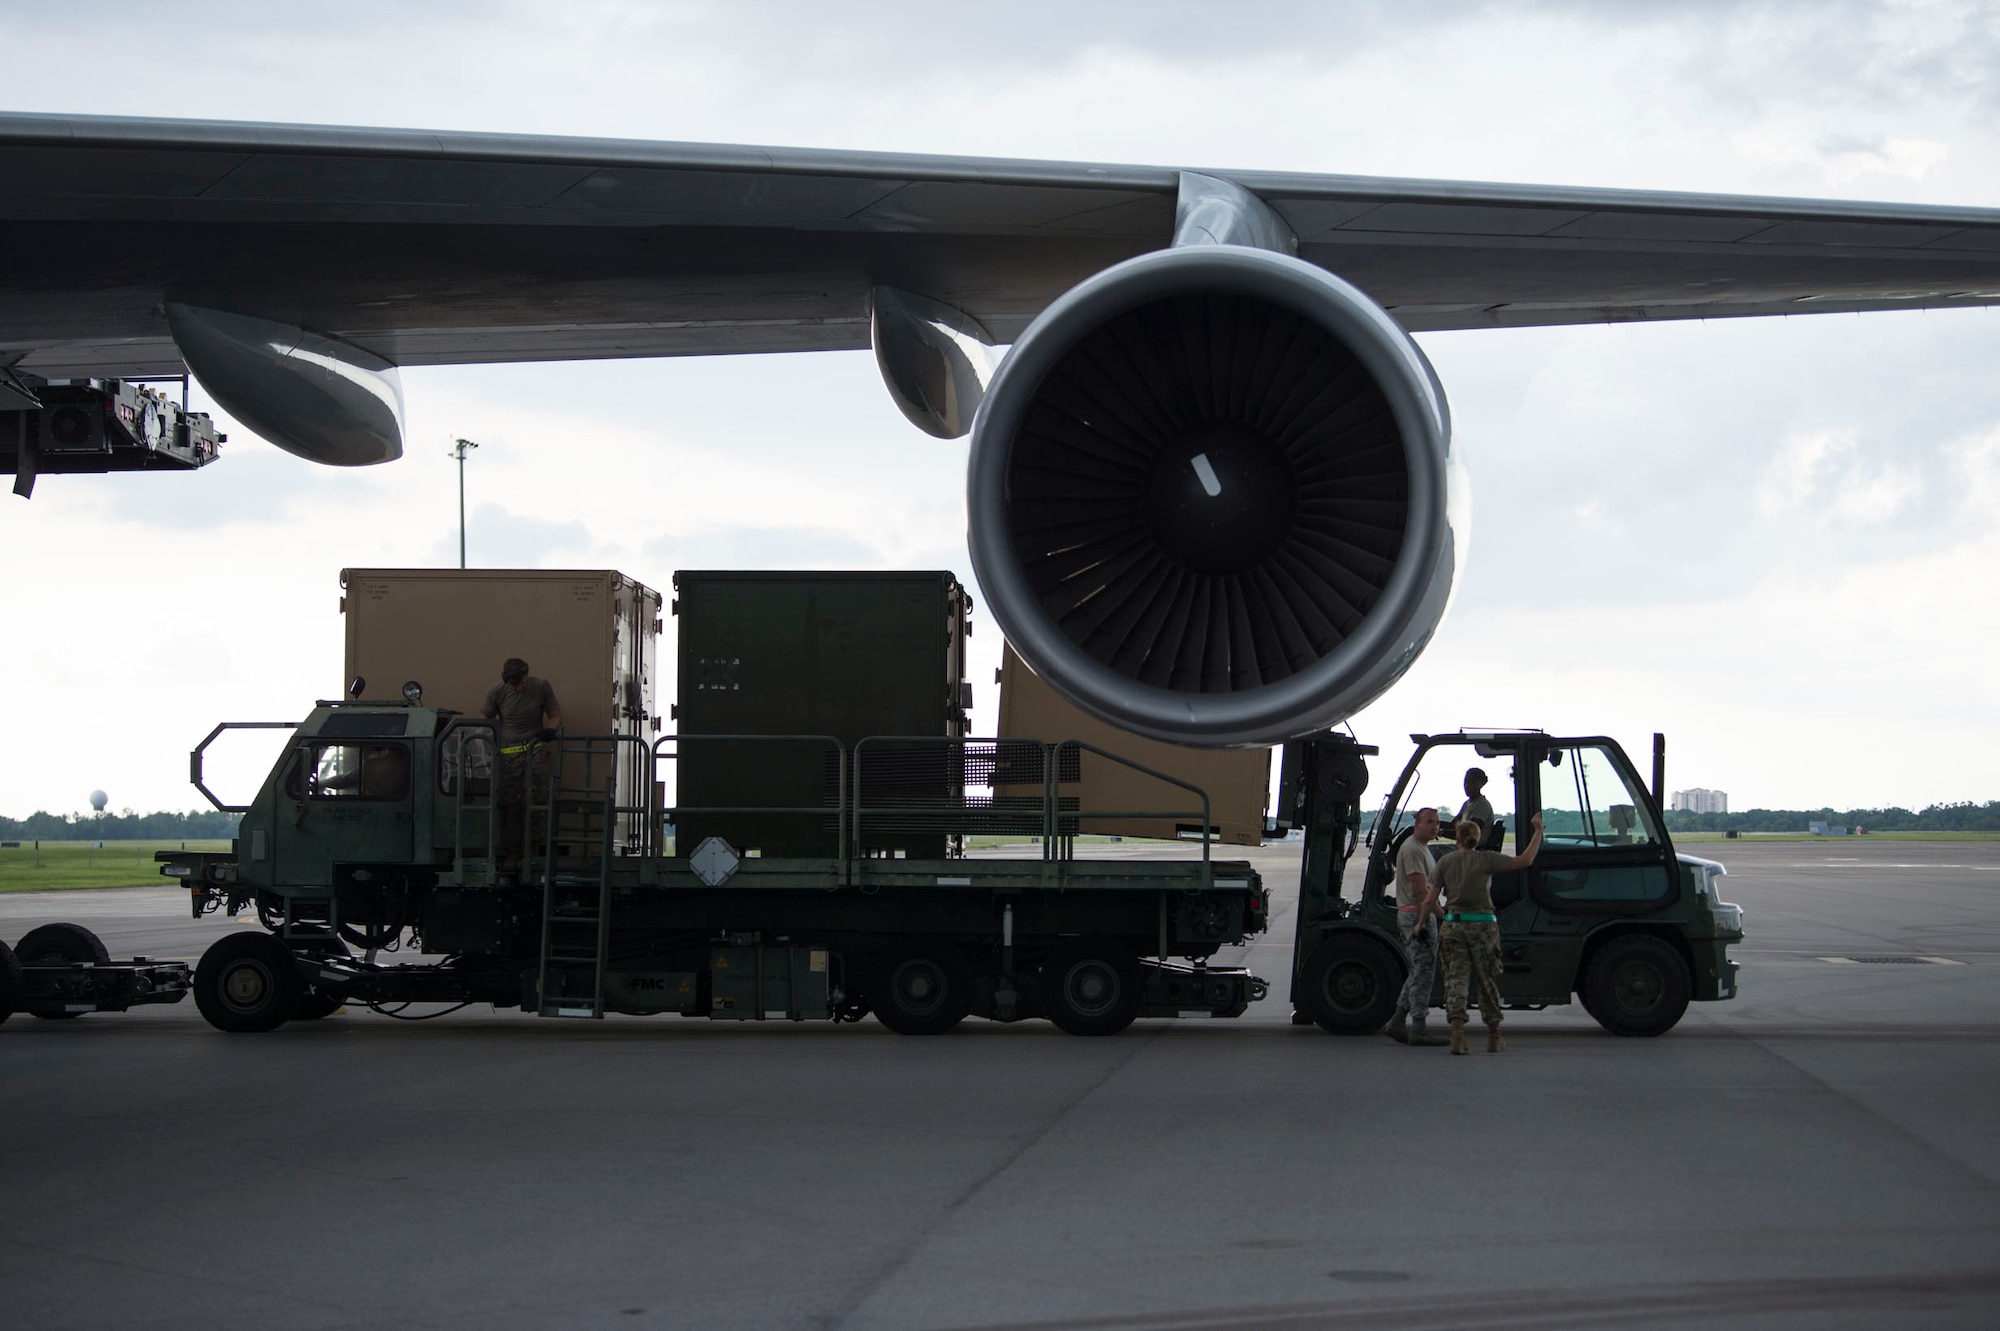 Members of the 6th Logistics Readiness Squadron (LRS) remove cargo from a Boeing 747 aircraft during a cargo movement at MacDill Air Force Base, Fla., July 31, 2019. With 32 increments of cargo weighing 144,470 pounds, this movement equates to 22 percent of total tonnage moved by the 6th LRS in 2019. The cargo belonged to the Joint Communications Support Element. (U.S. Air Force photo by Senior Airman Adam R. Shanks)